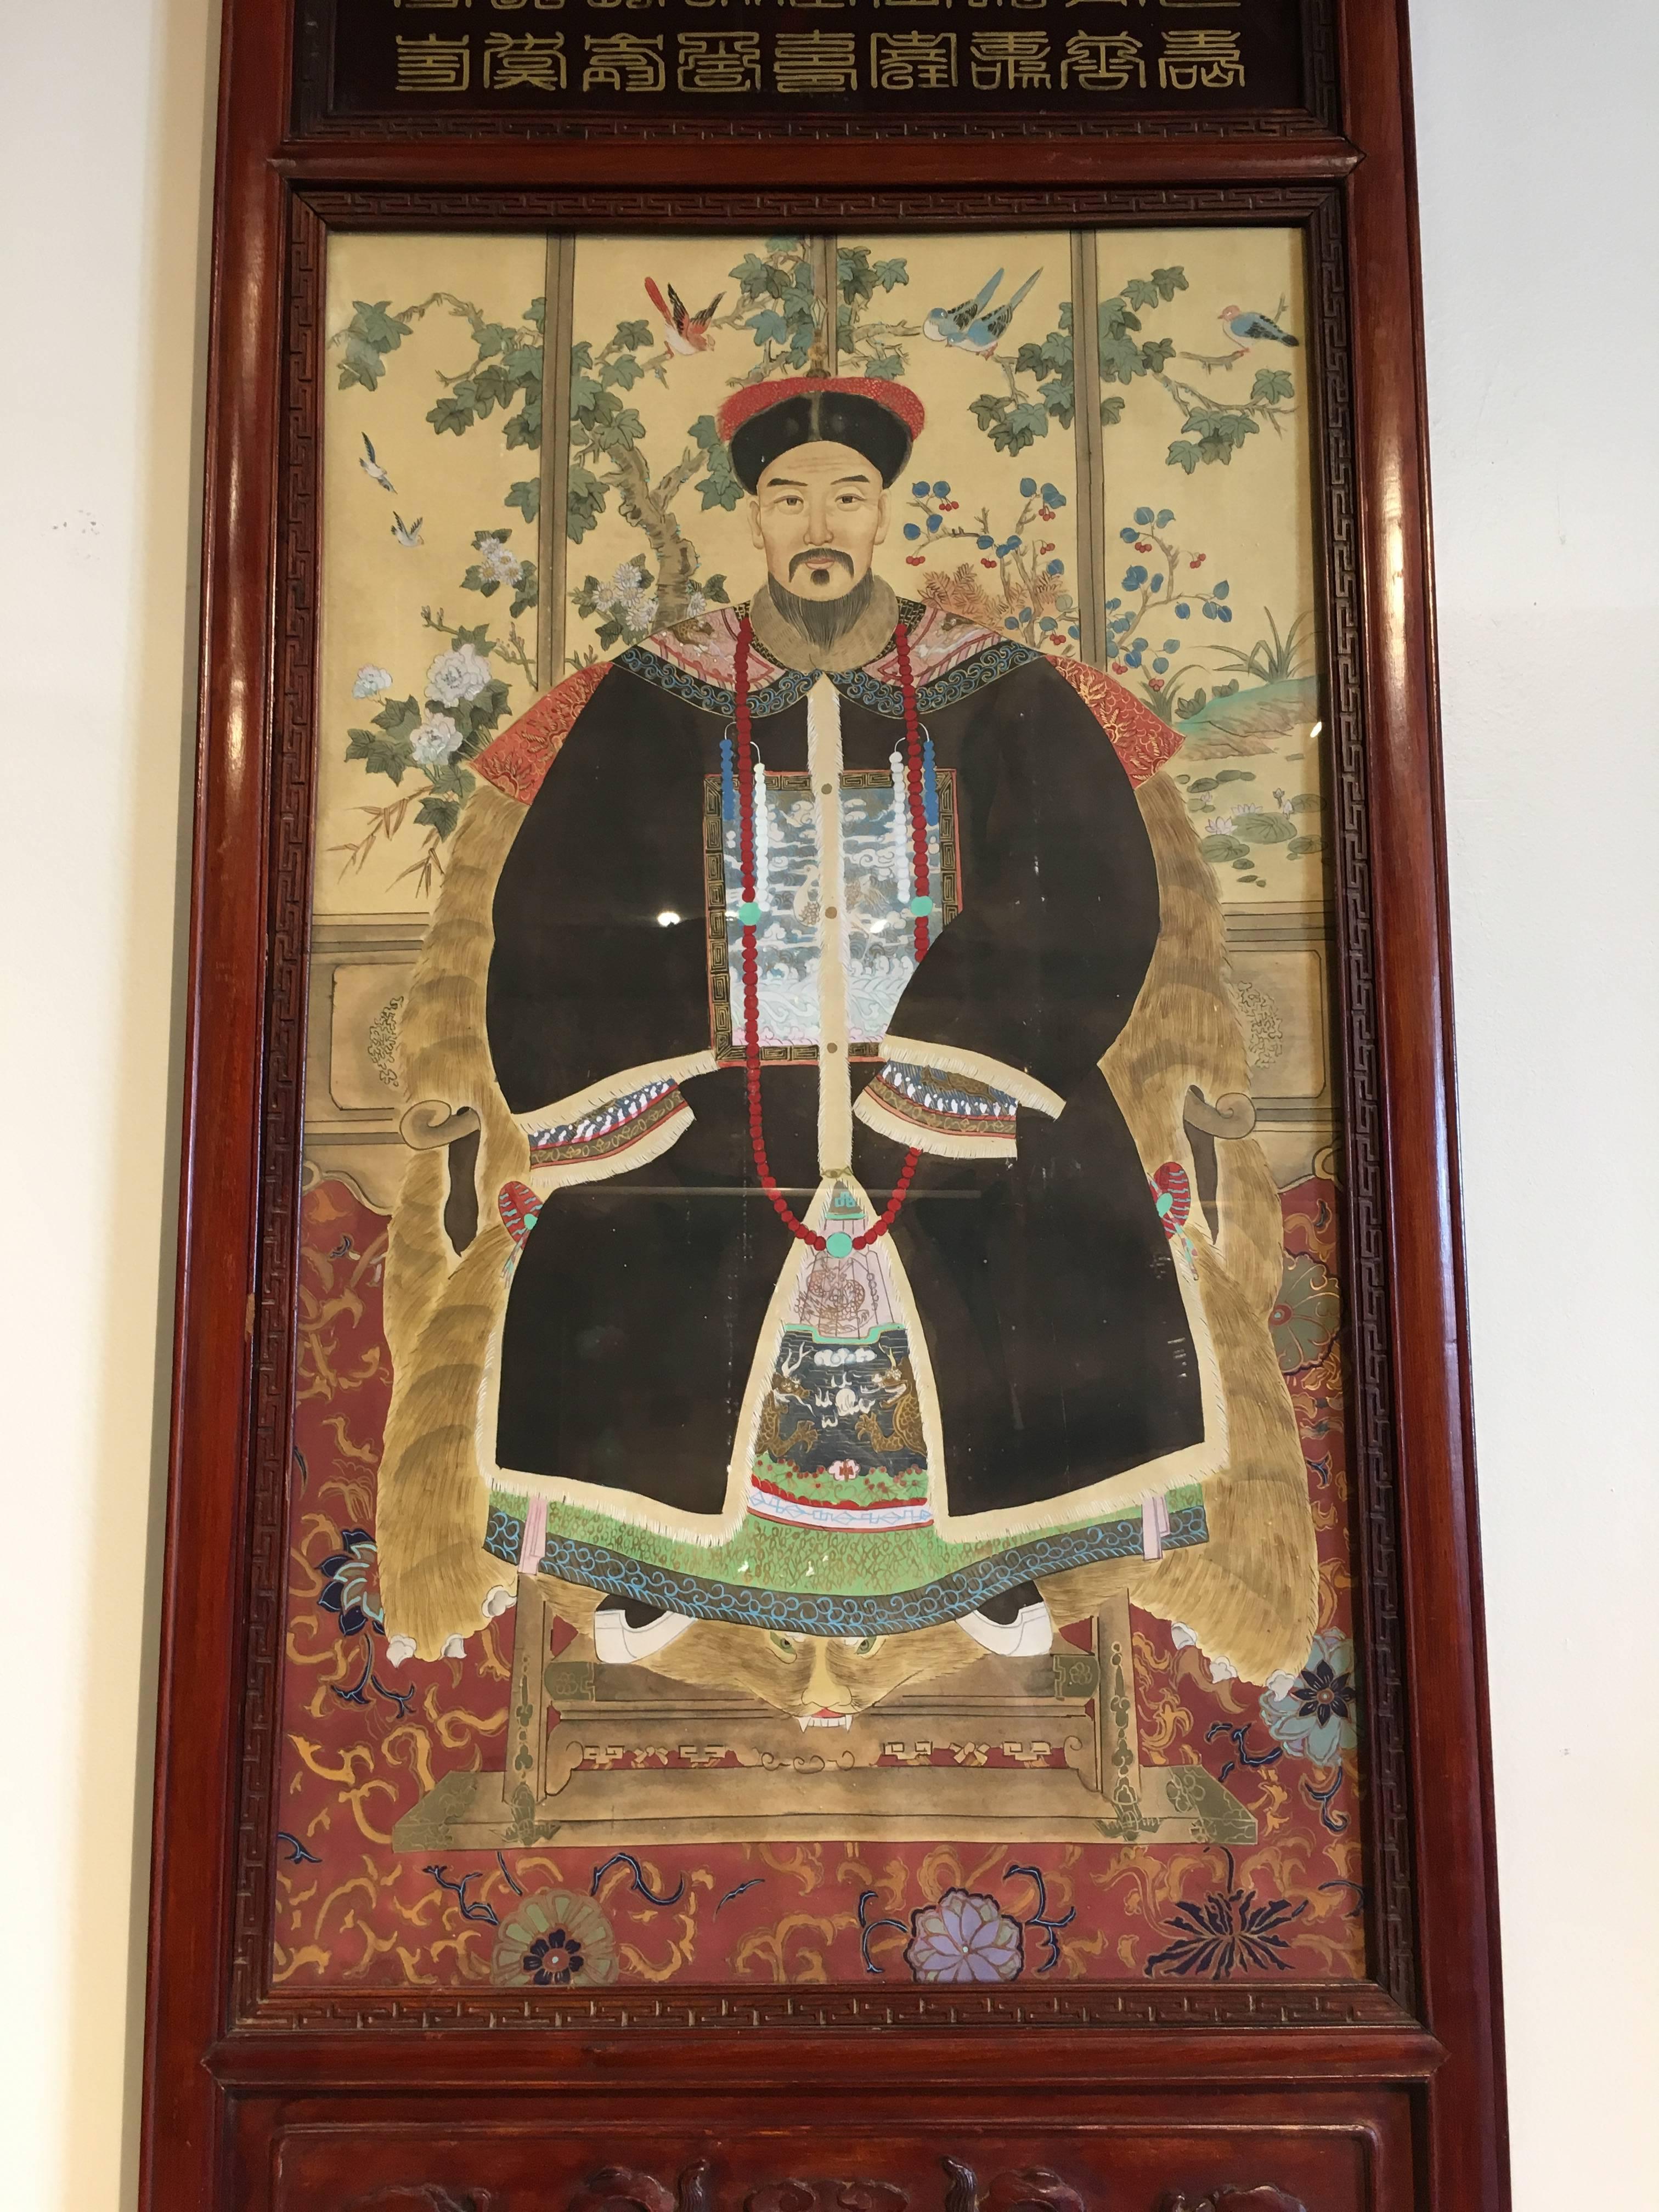 A pair of hand-painted ancestor portraits in hand-carved rosewood frames, with reverse glass painted accents.
Painted during China's Republic Period (1912 to 1949), the portraits are portrayals of members of the Qing Dynasty imperial court. The